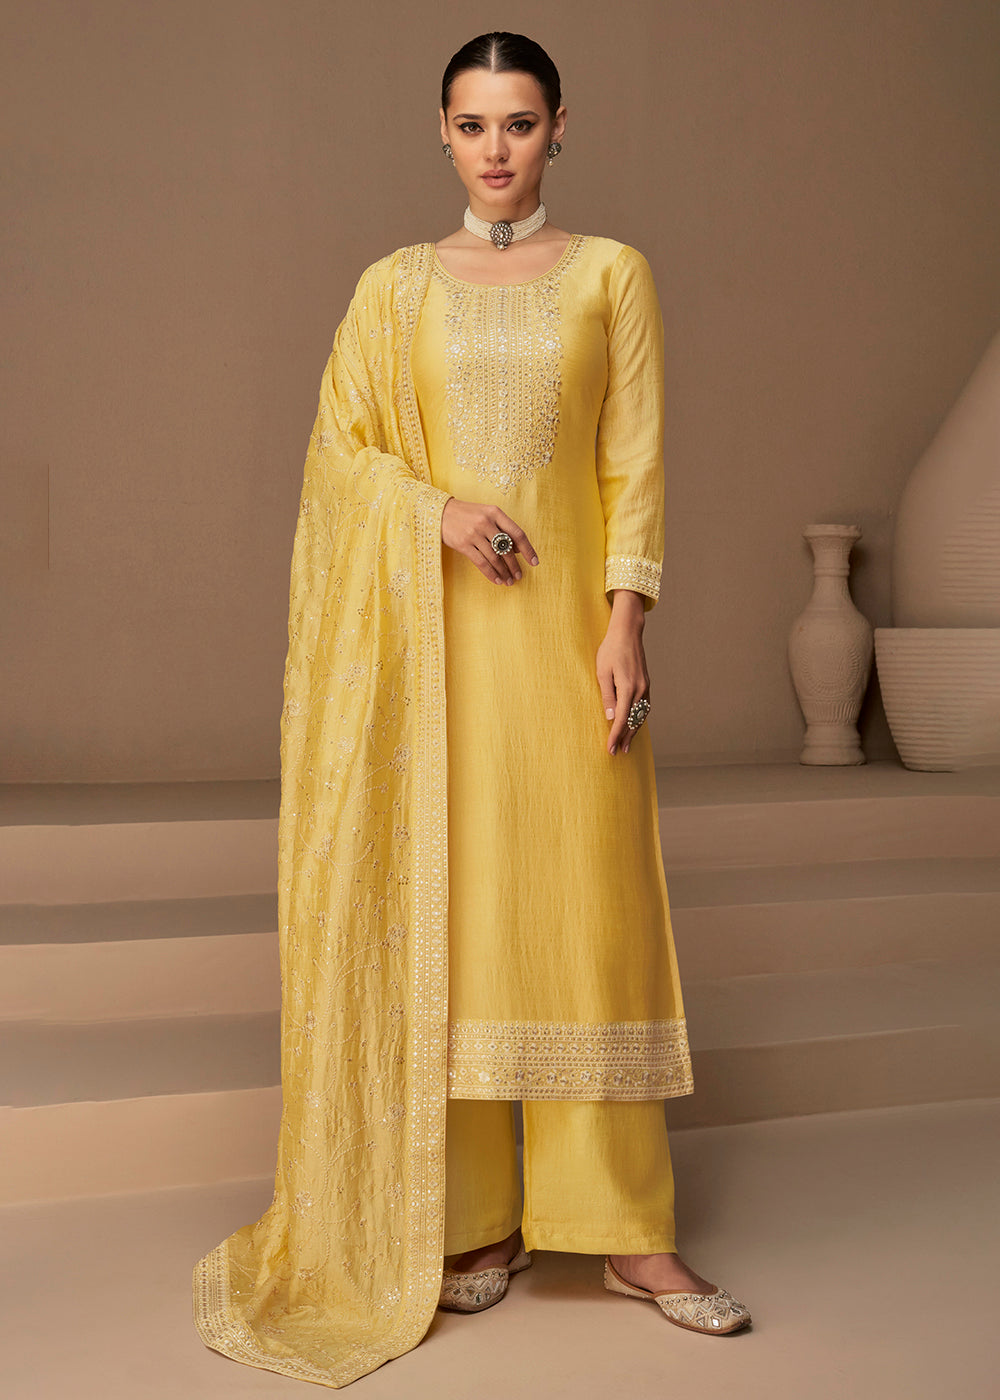 Buy Now Beautiful Bright Yellow & Gold Embroidered Premium Silk Salwar Suit Online in USA, UK, Canada, Germany, Australia & Worldwide at Empress Clothing.